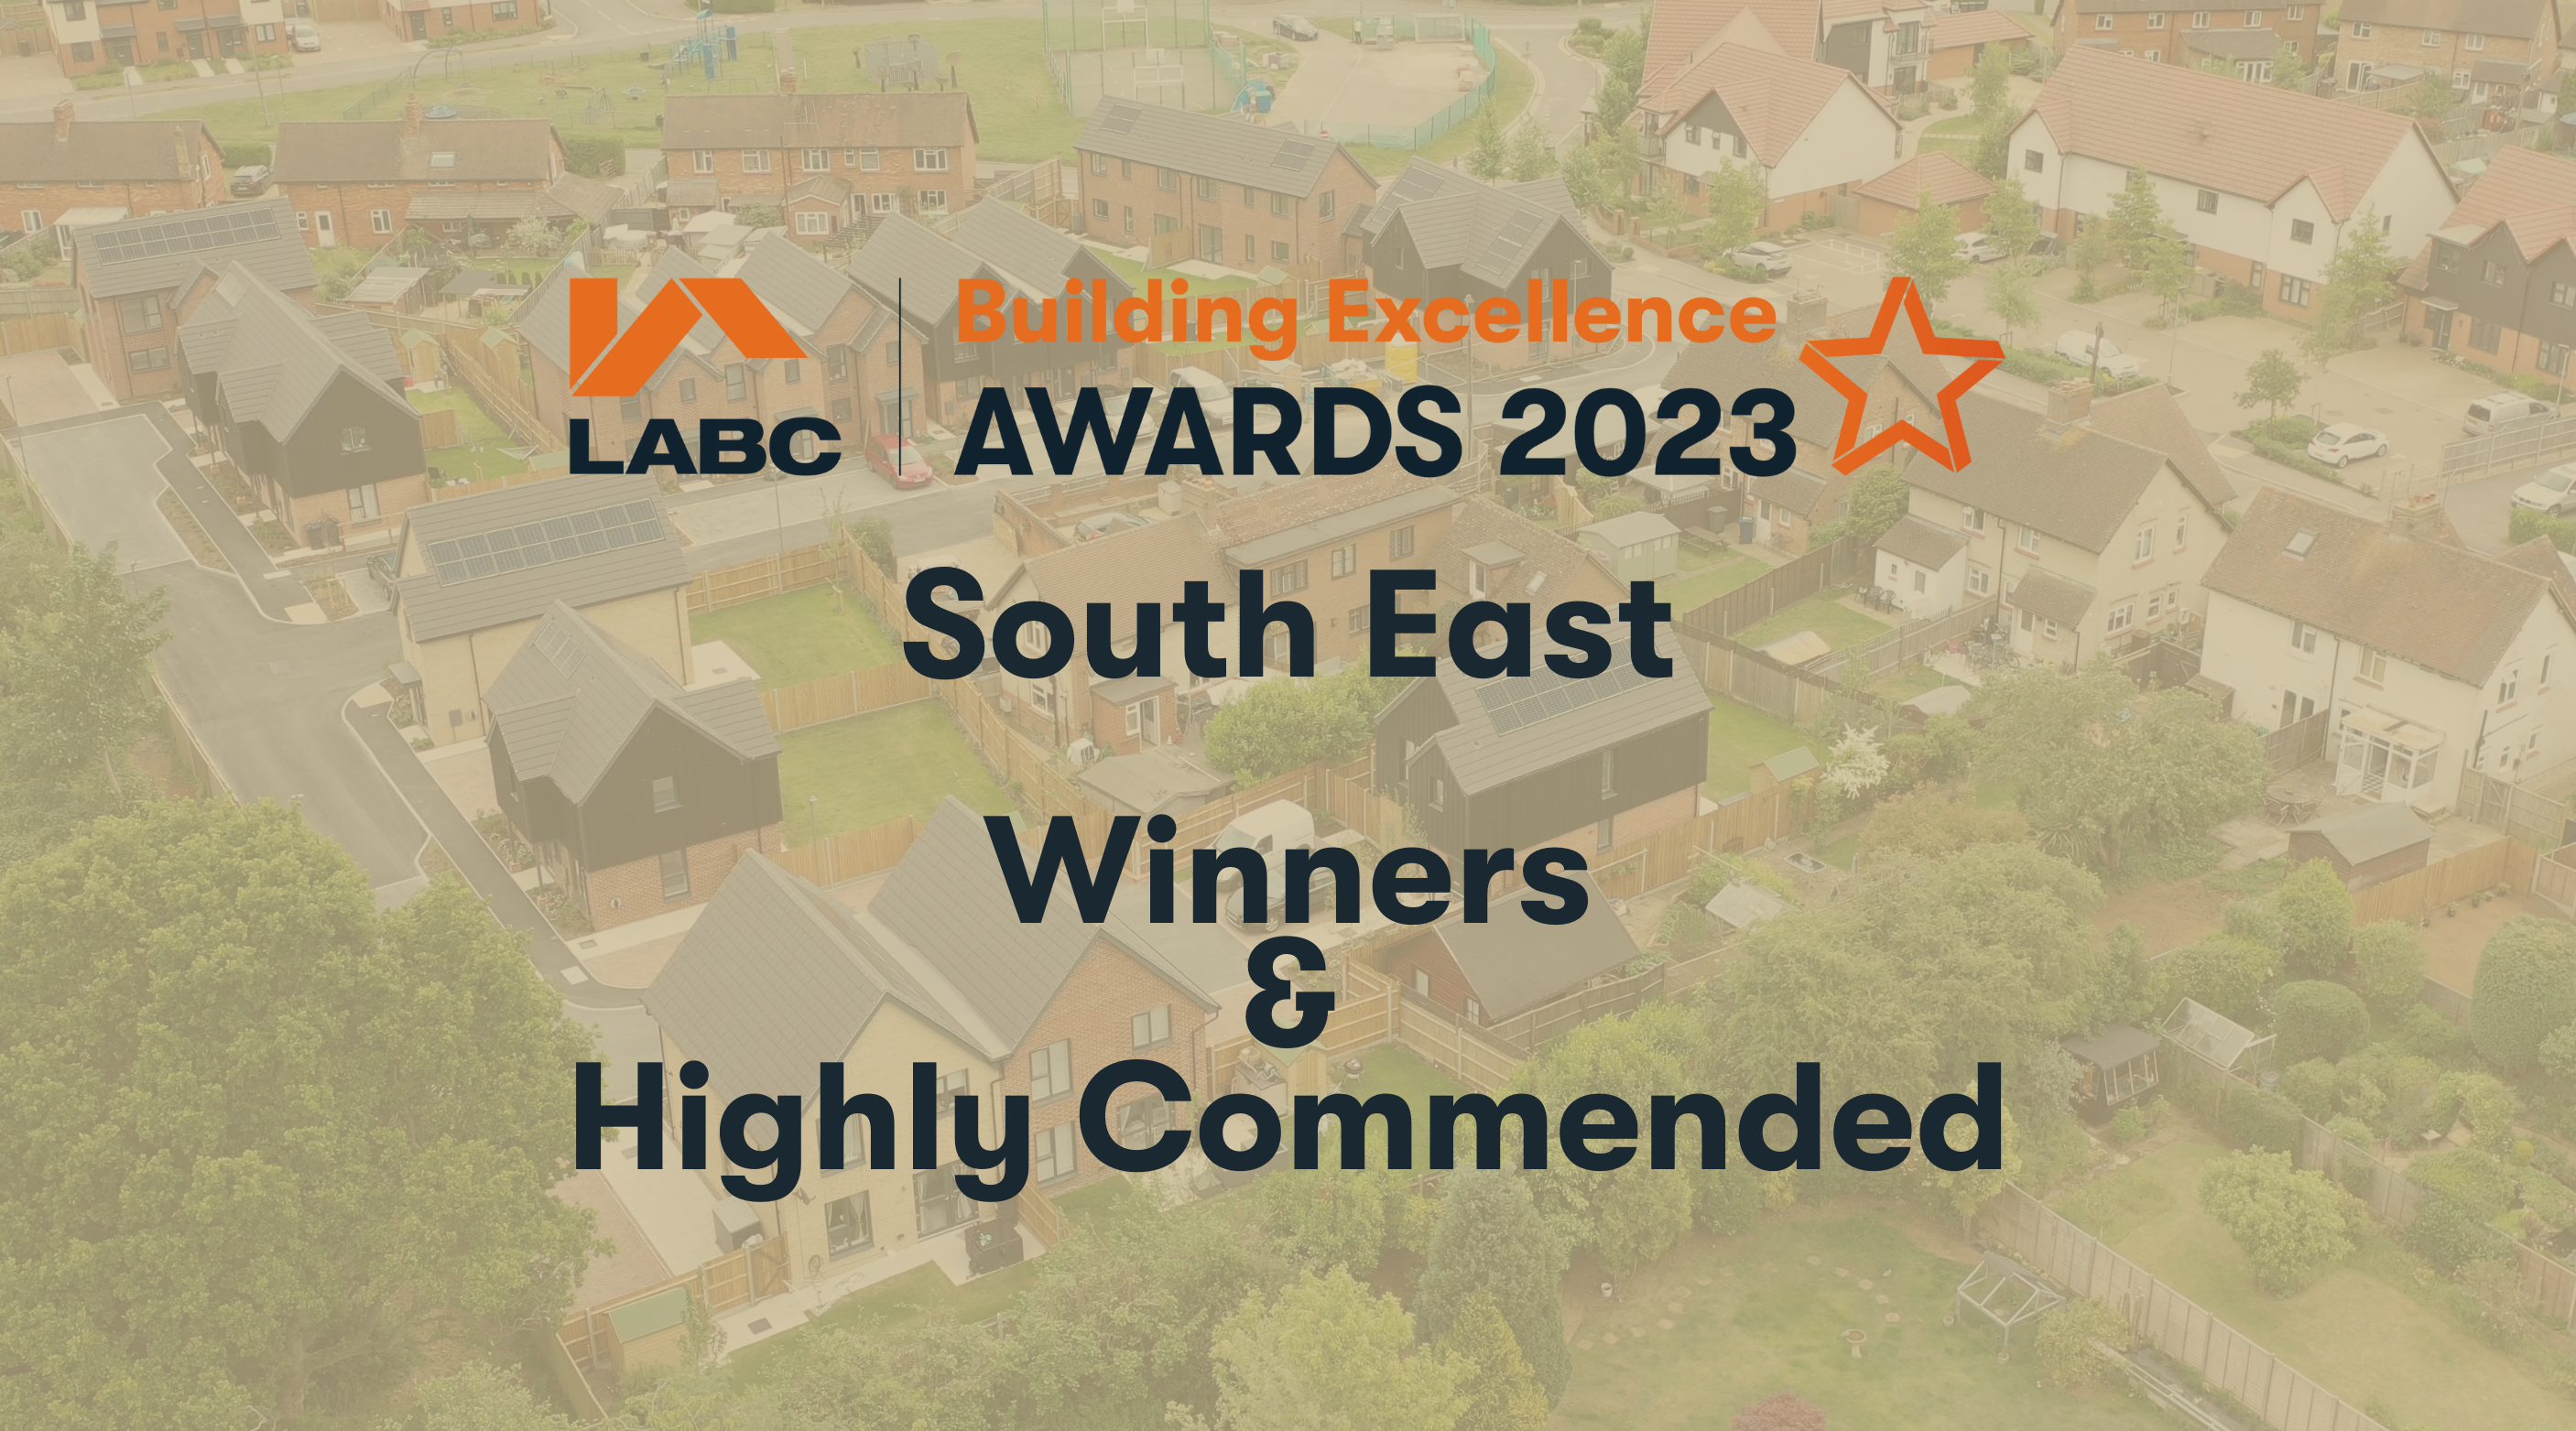 South East Awards 2023